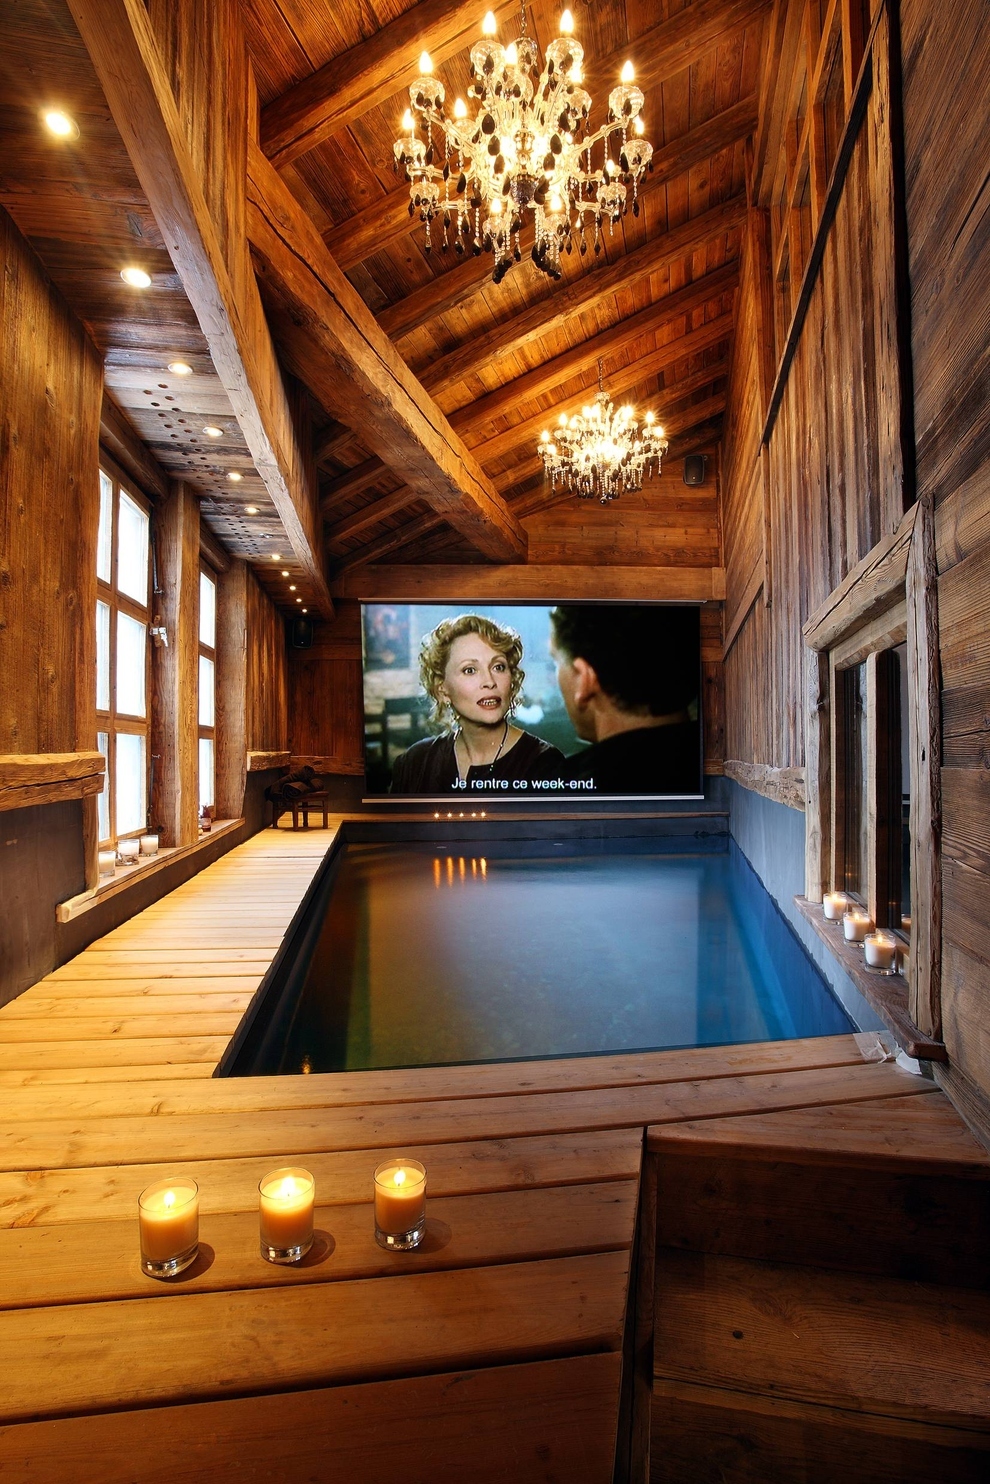 living rooms most incredible pool indoor amazing around theater movie tub dream swimming cool theatre spa ceiling combo